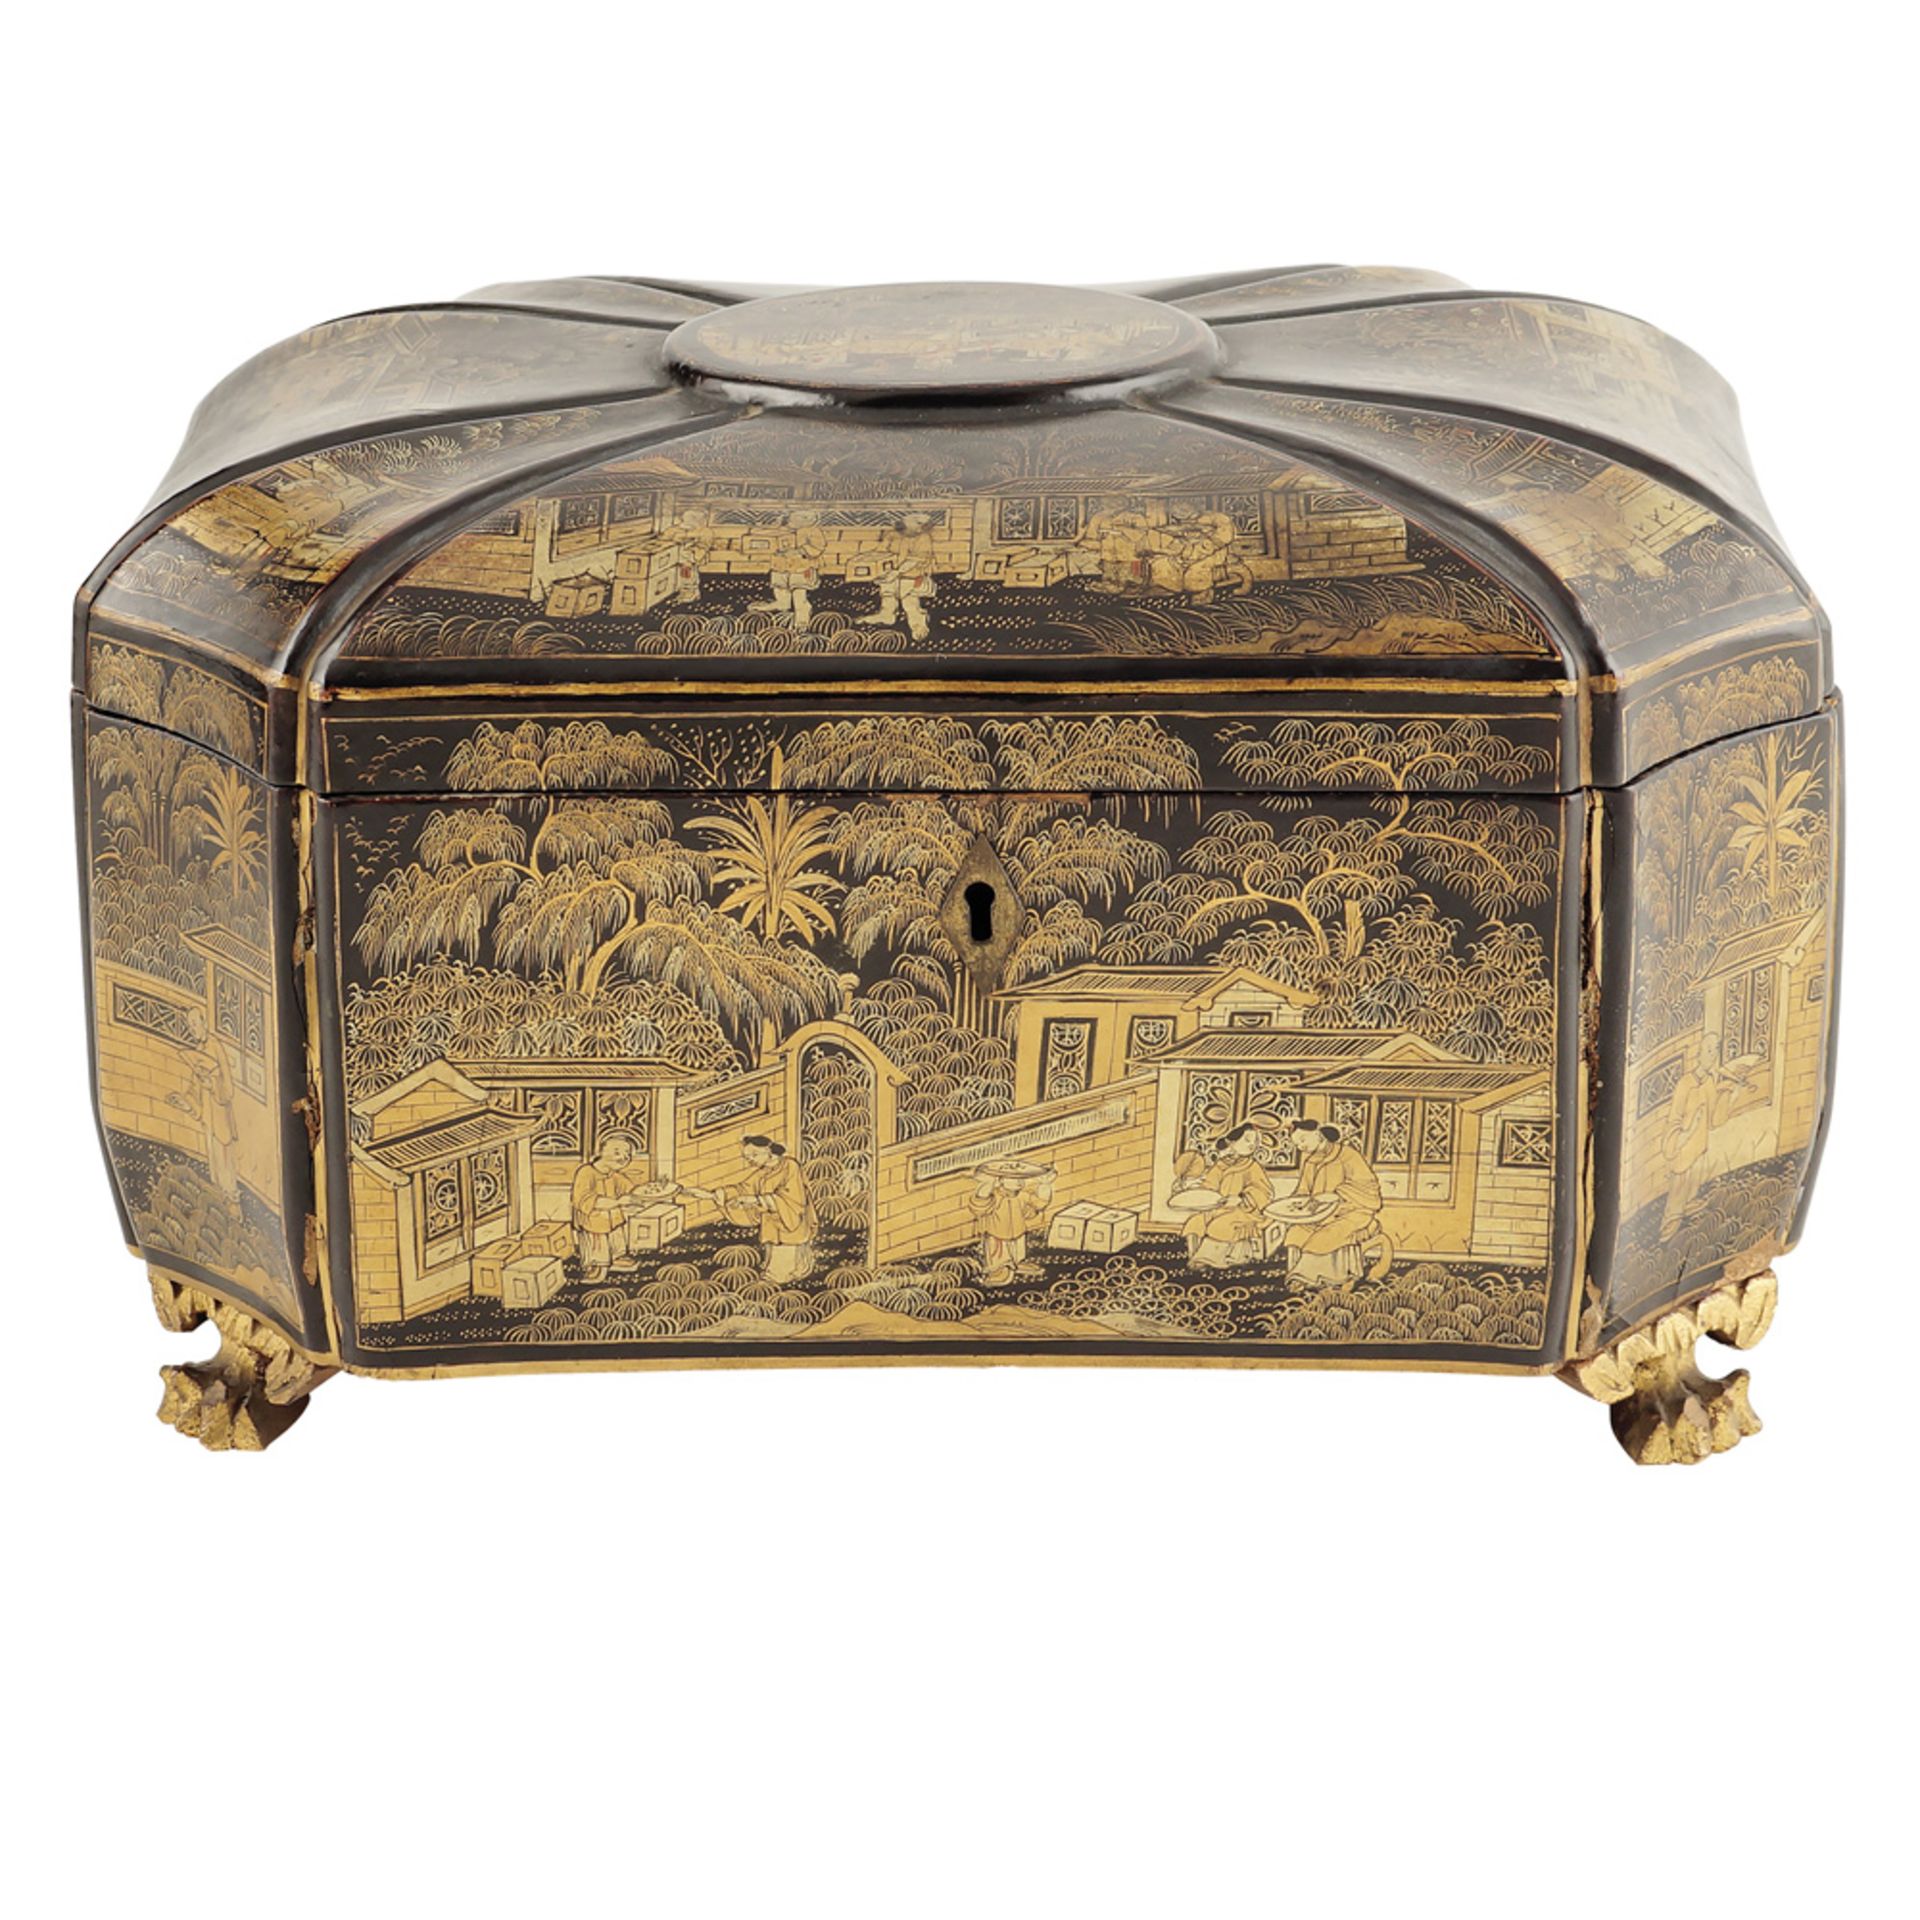 A black and gloden laquer tea box holder China, end 19th century 13,5x28x21 cm.